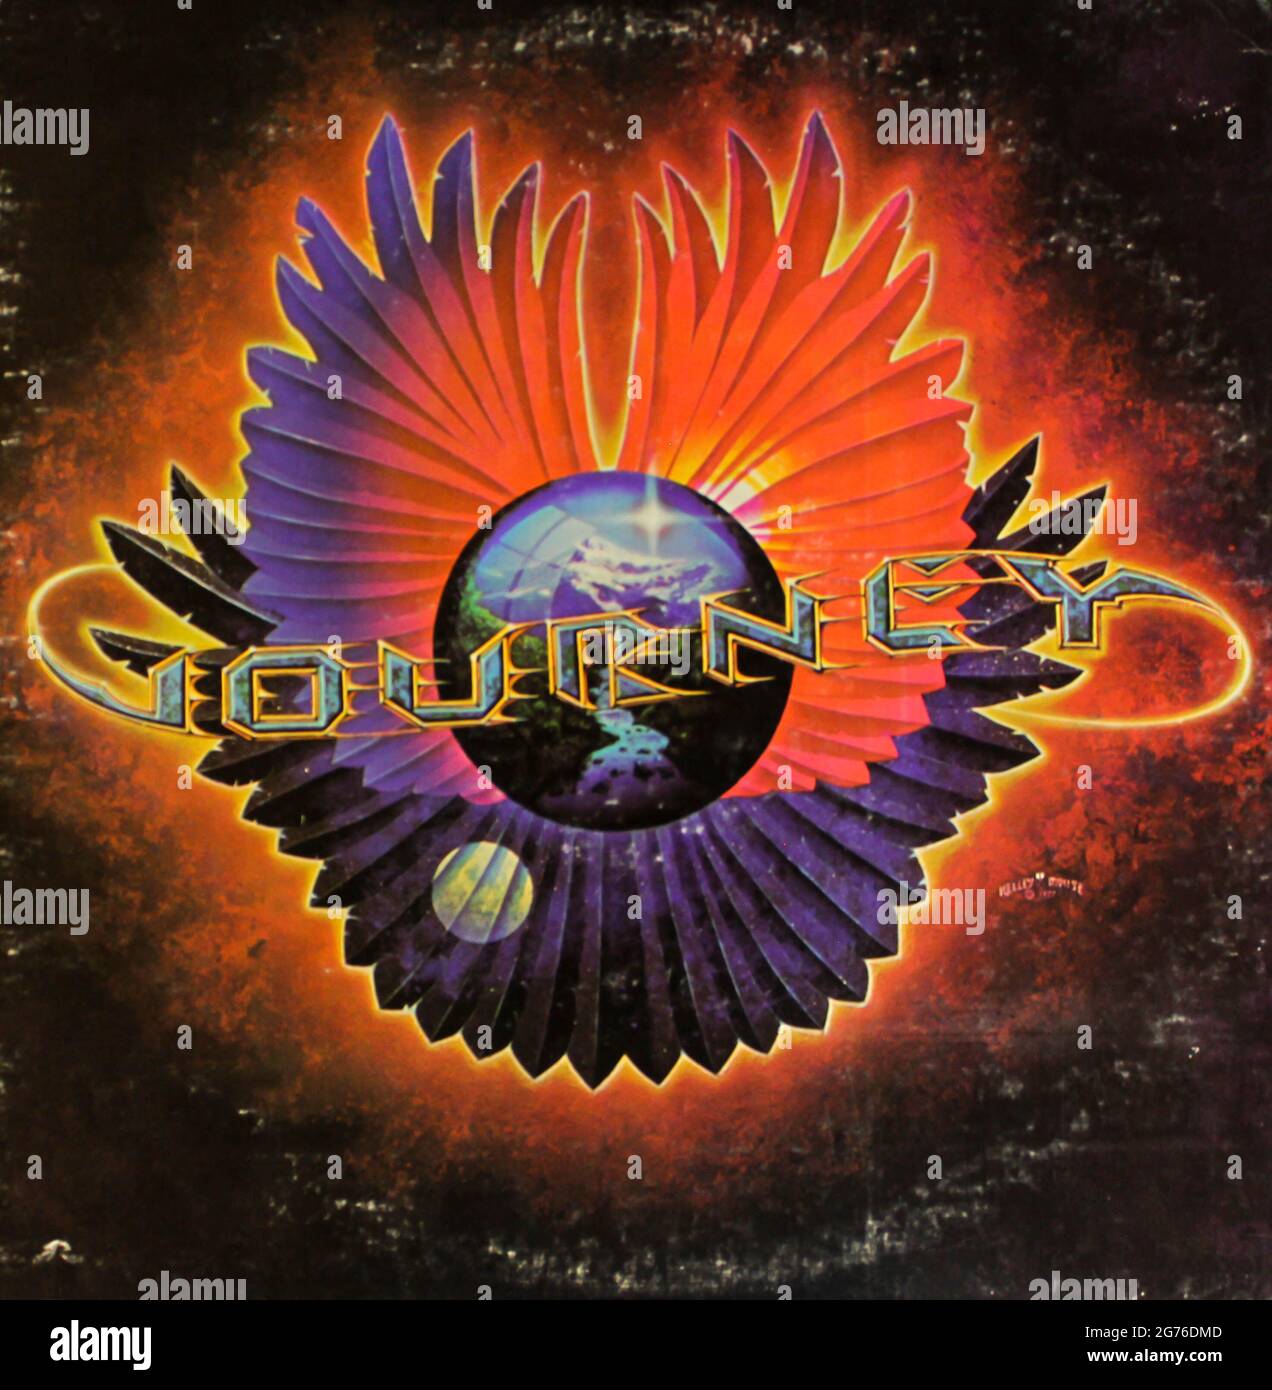 Hard rock and soft rock band,  Journey band music album on vinyl record LP disc. Titled: Infinity album cover Stock Photo